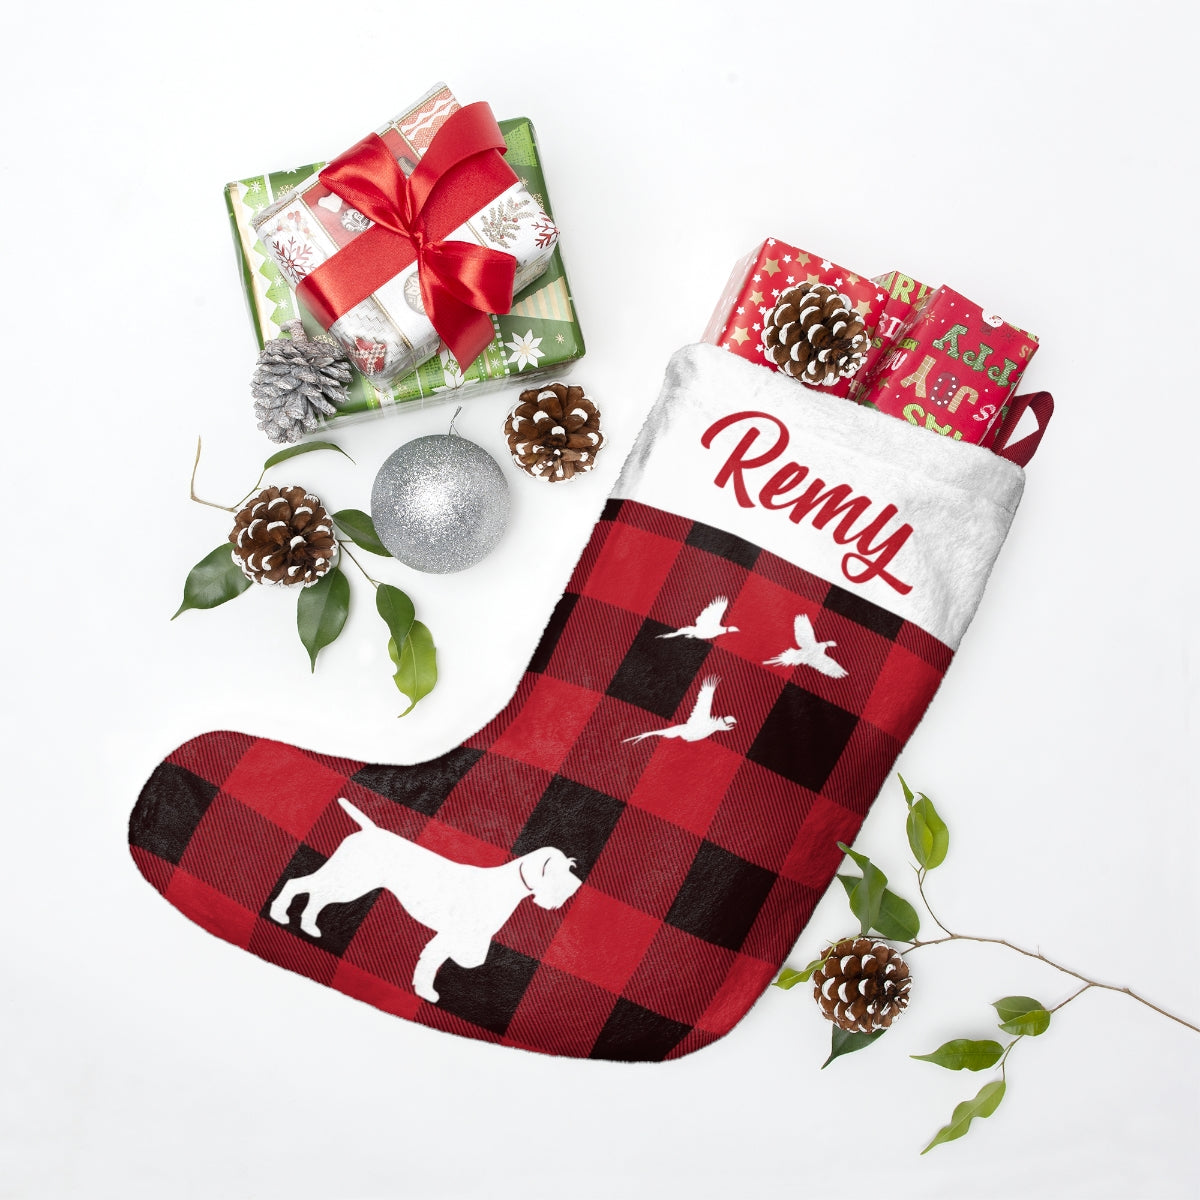 Remy Christmas Stockings